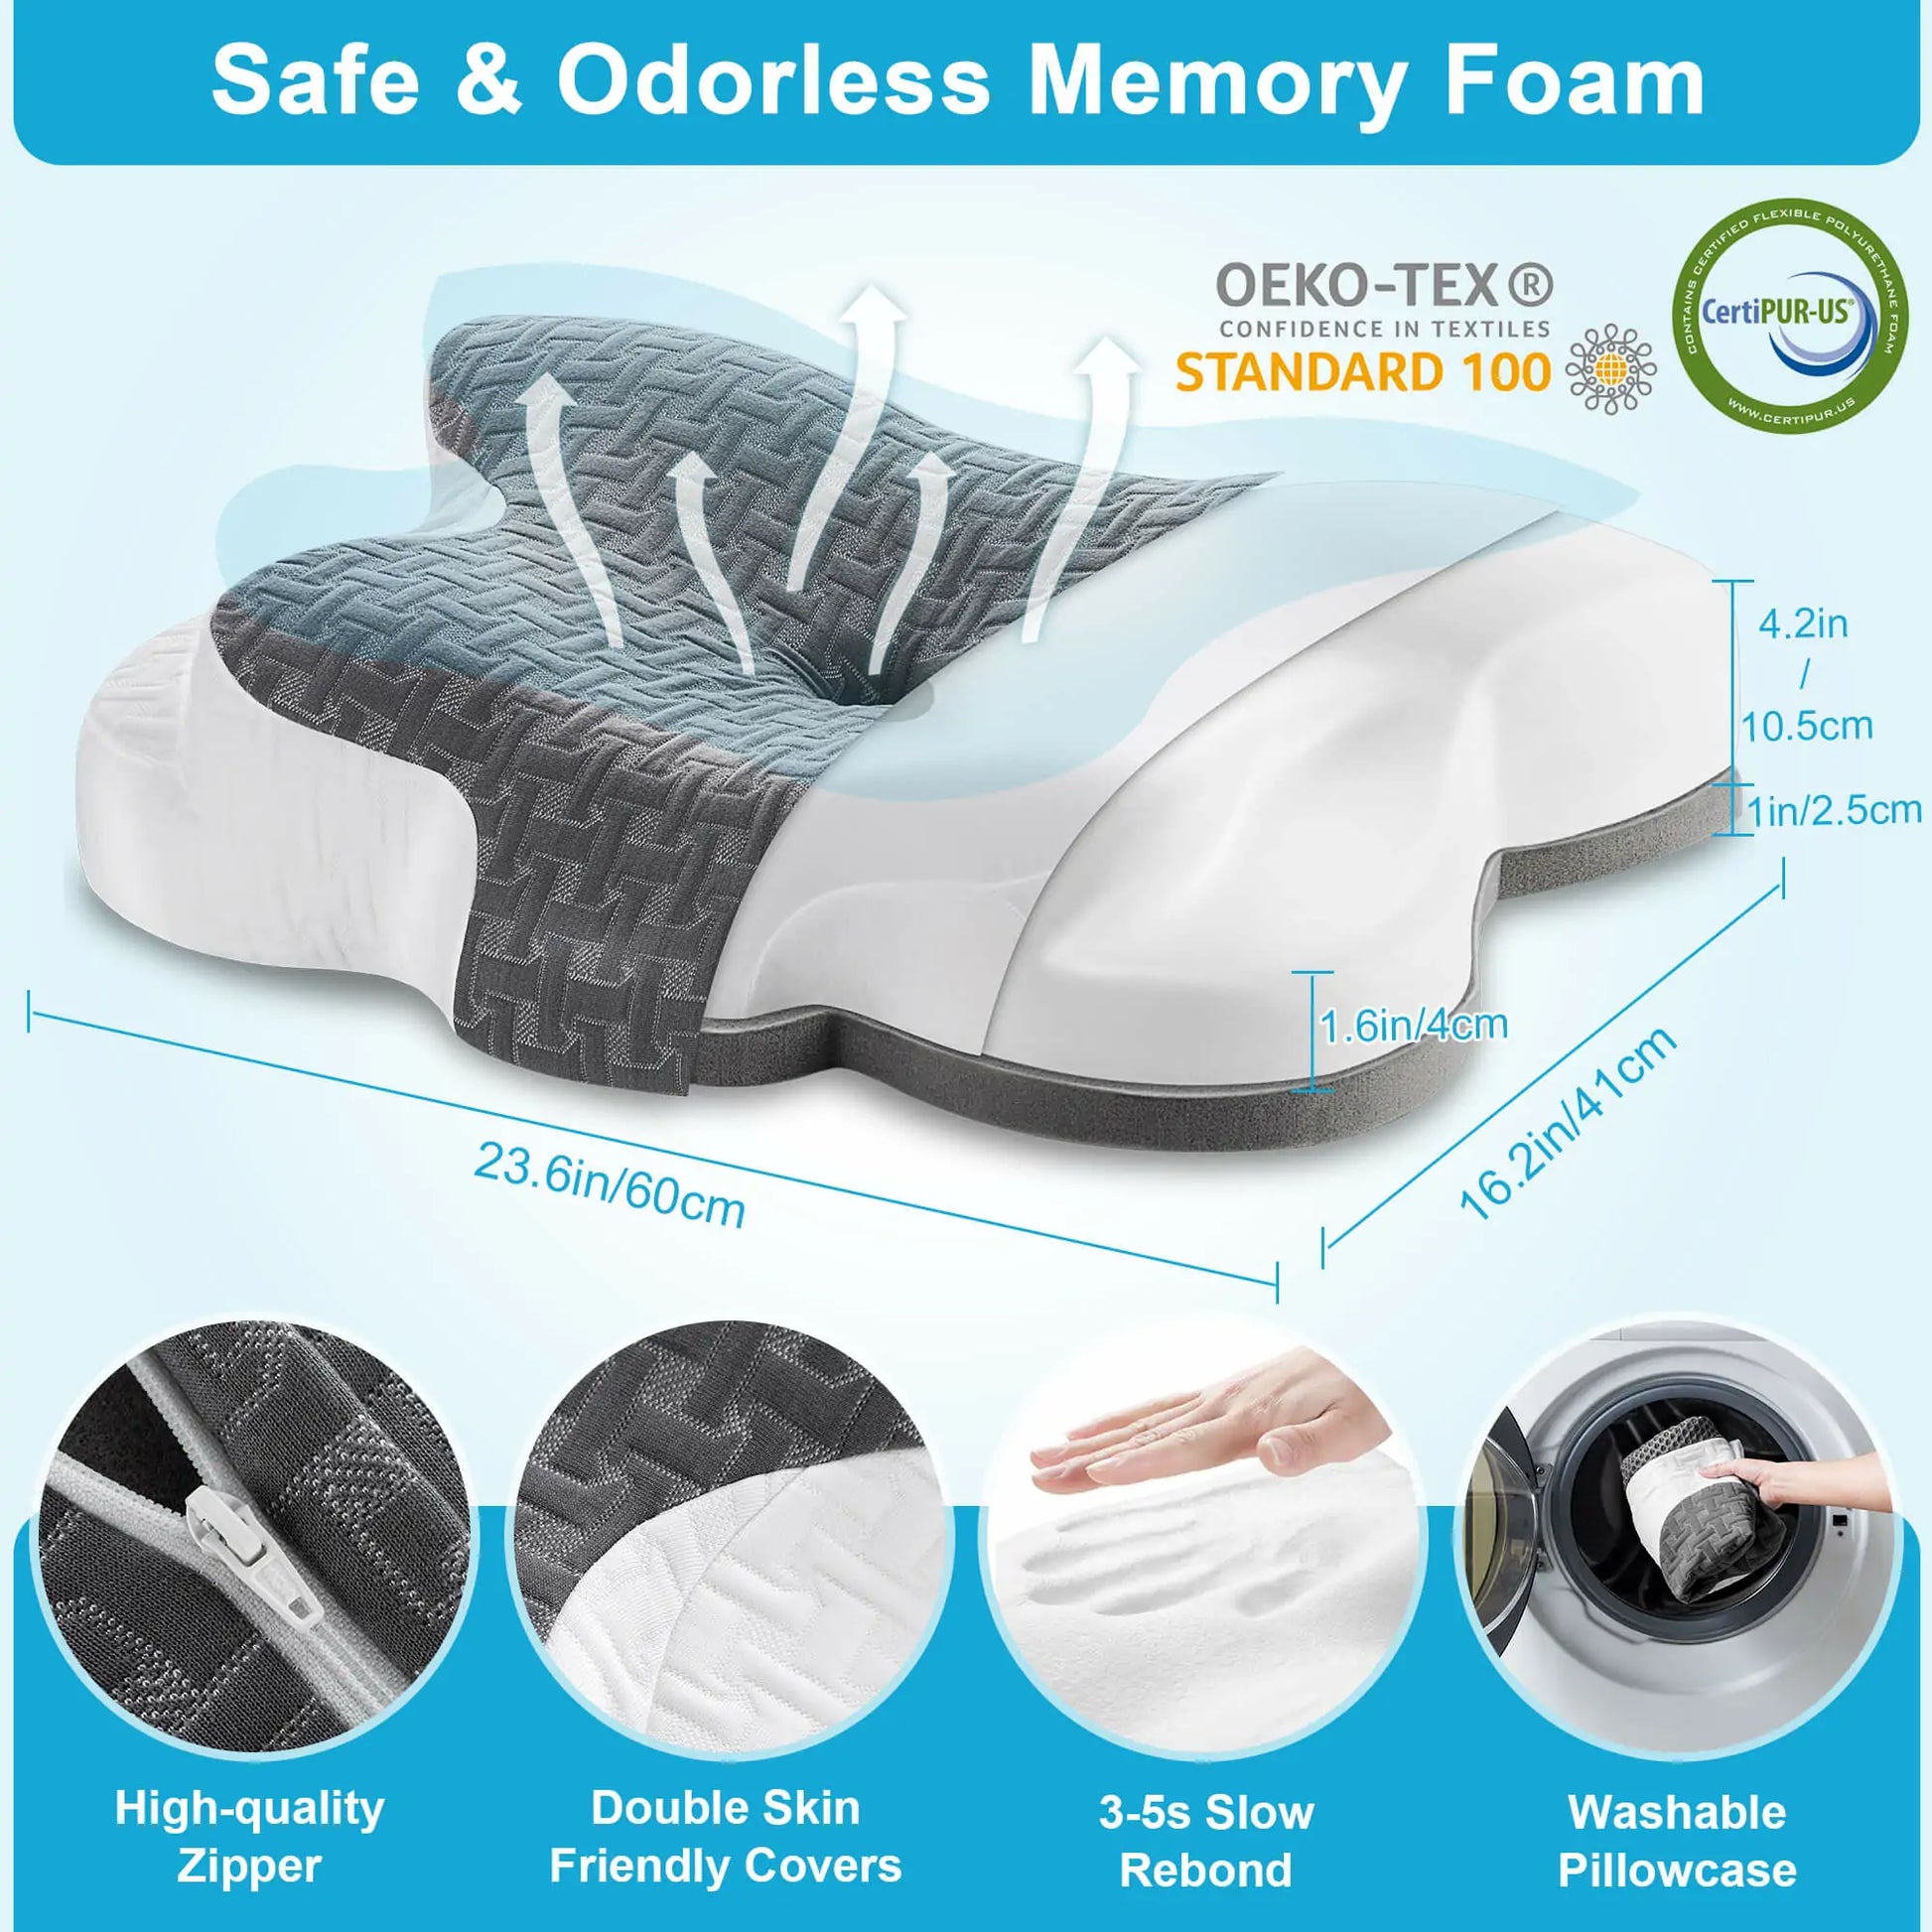 Cervical Pillow For Neck Pain Relief, Hollow Design Odorless